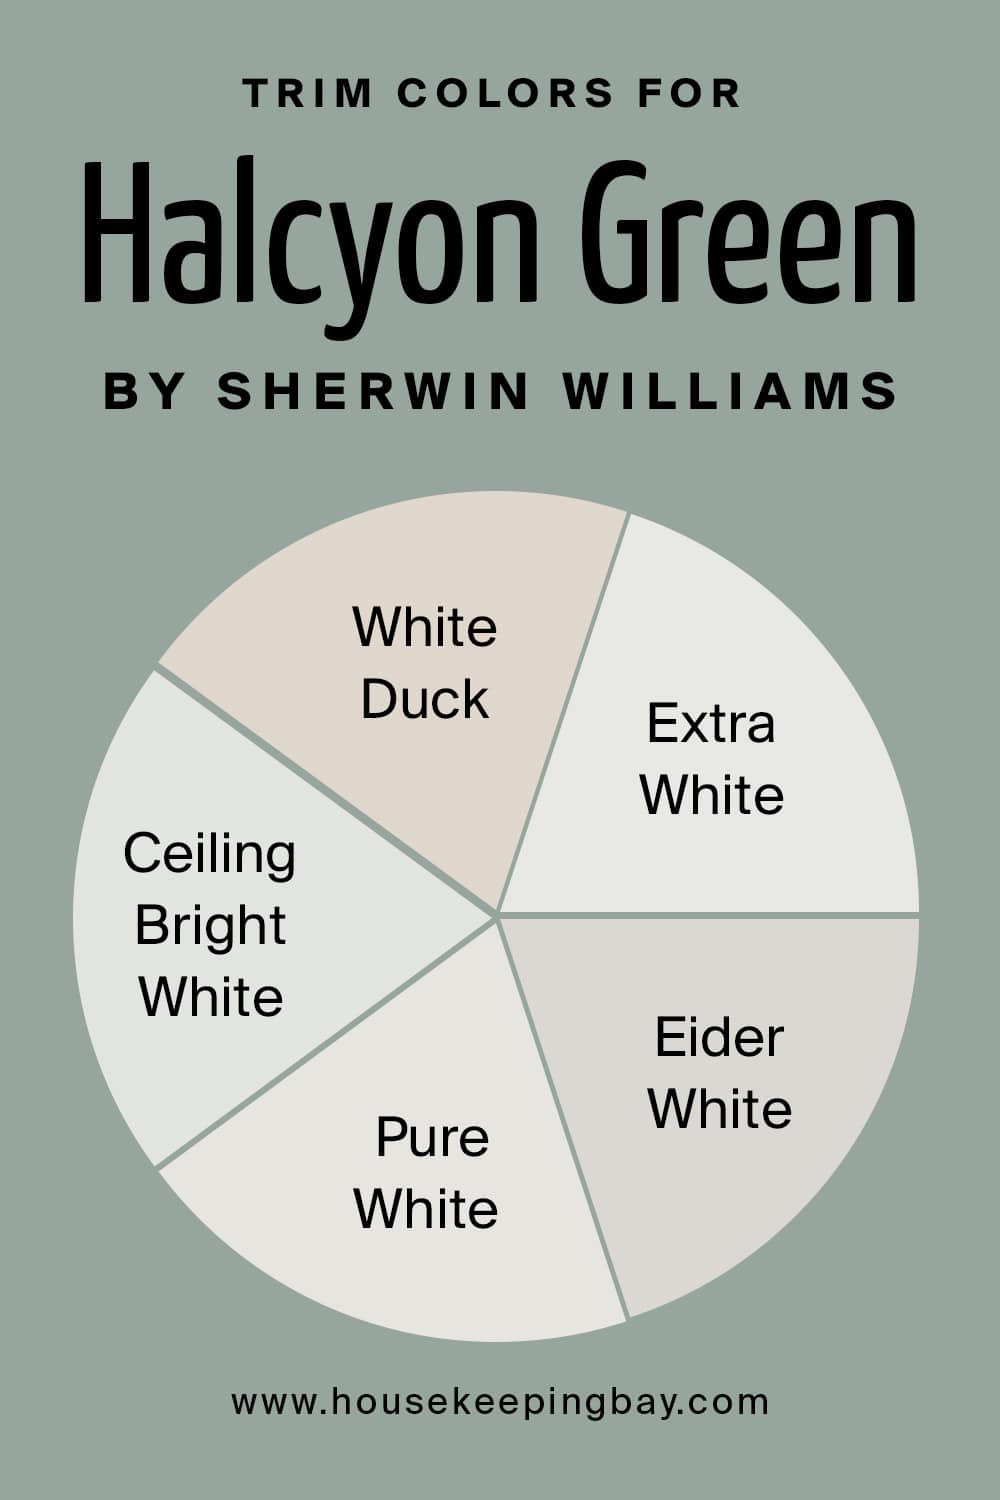 Trim Colors for Halcyon Green by Sherwin Williams